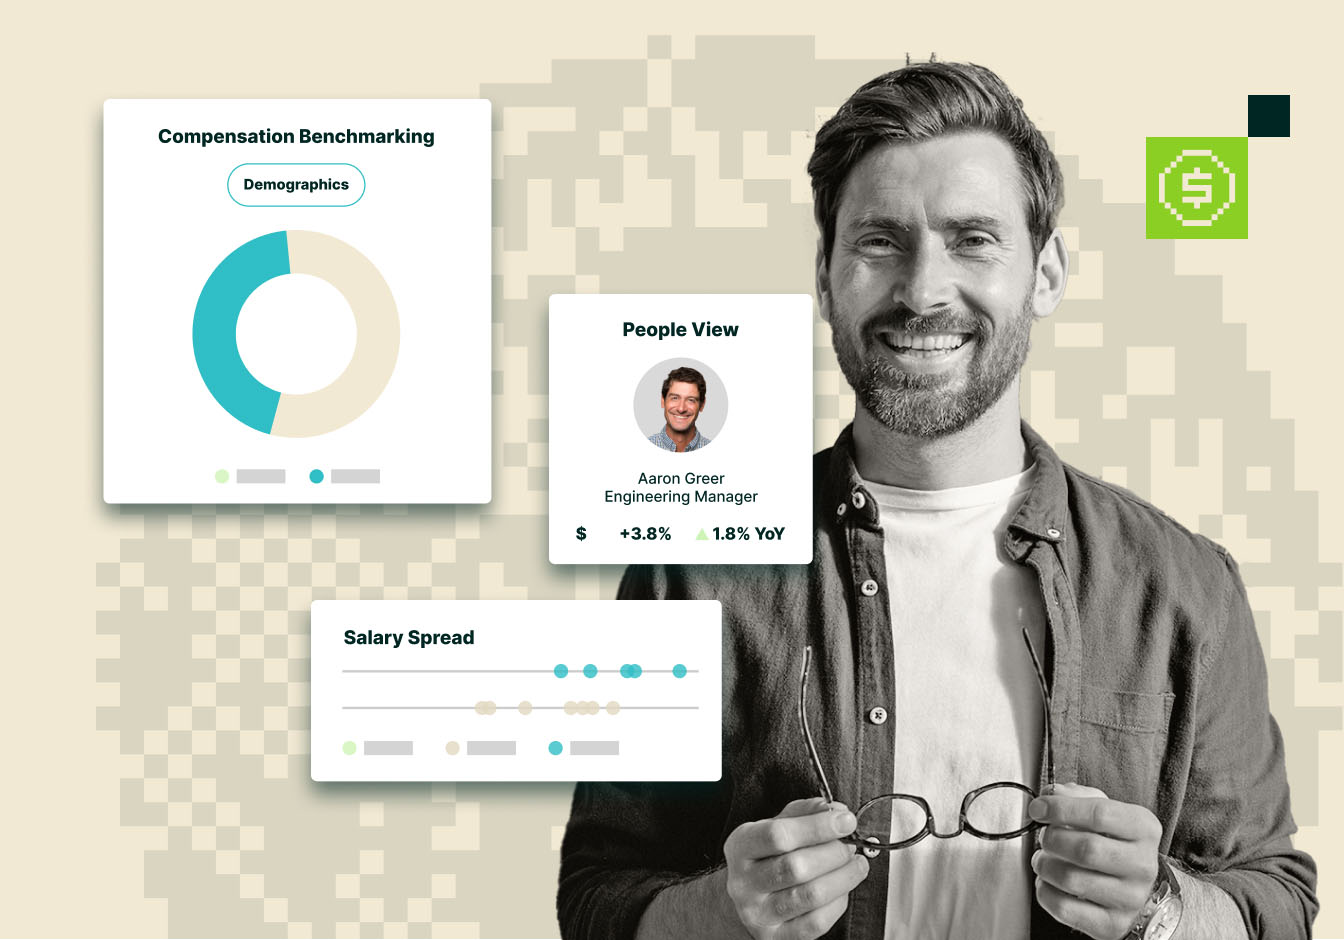 Male tech business leader surrounded by UI details of the Sequoia People Platform